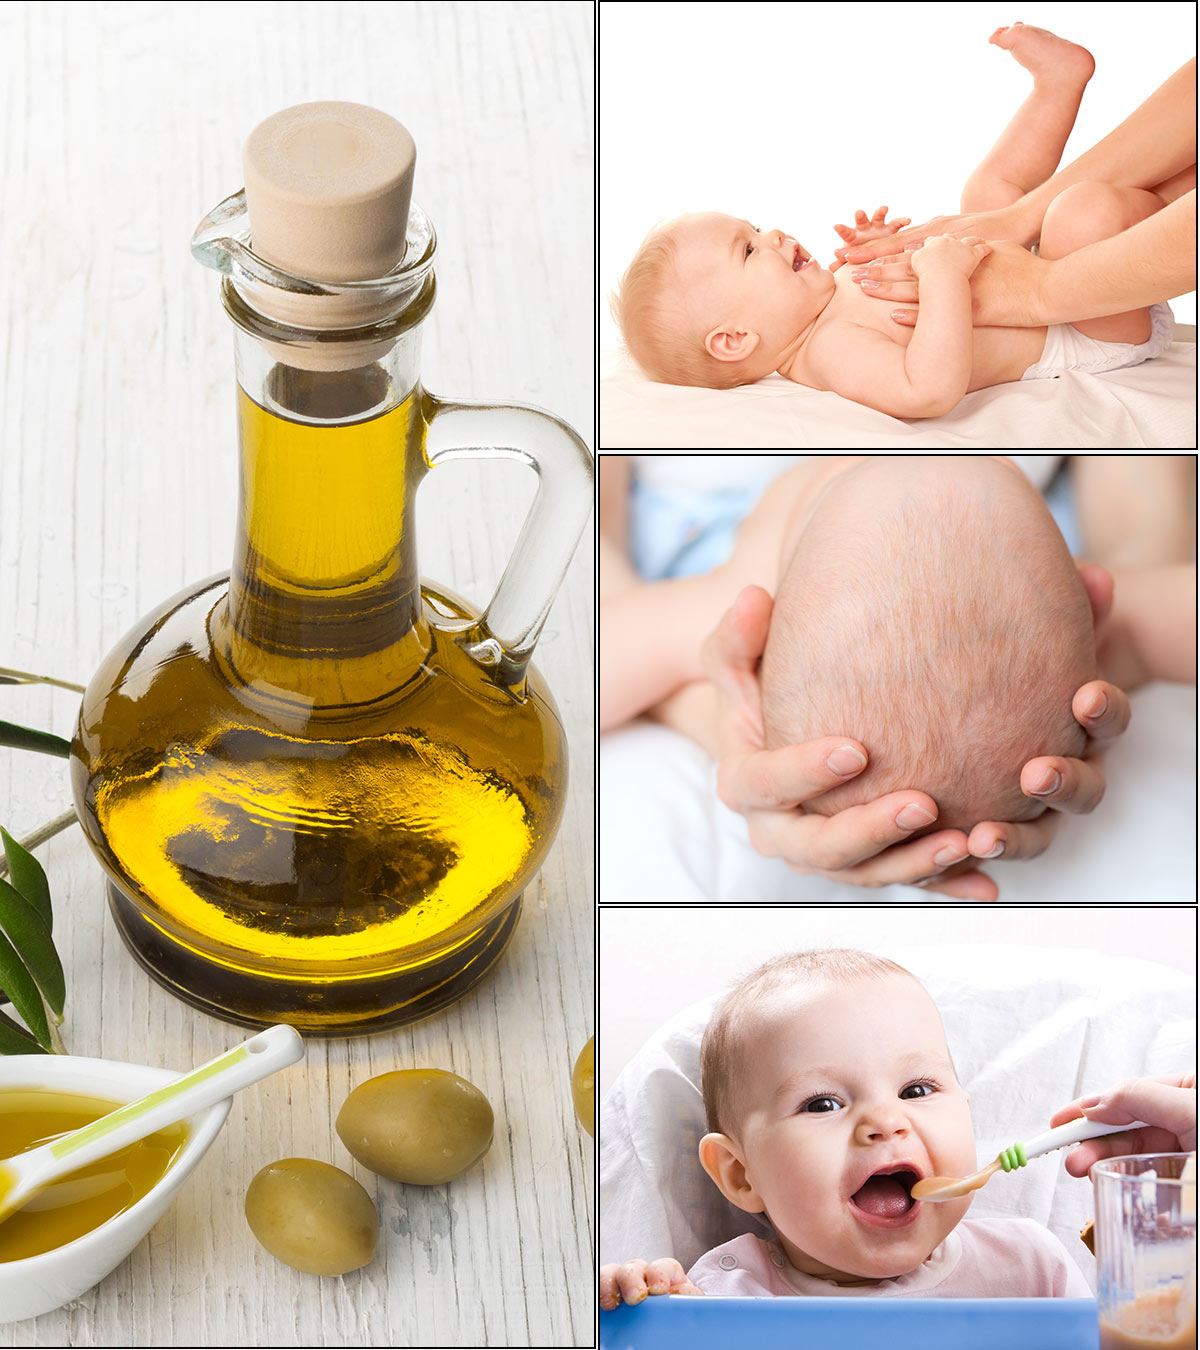 7 key benefits of using olive oil for babies